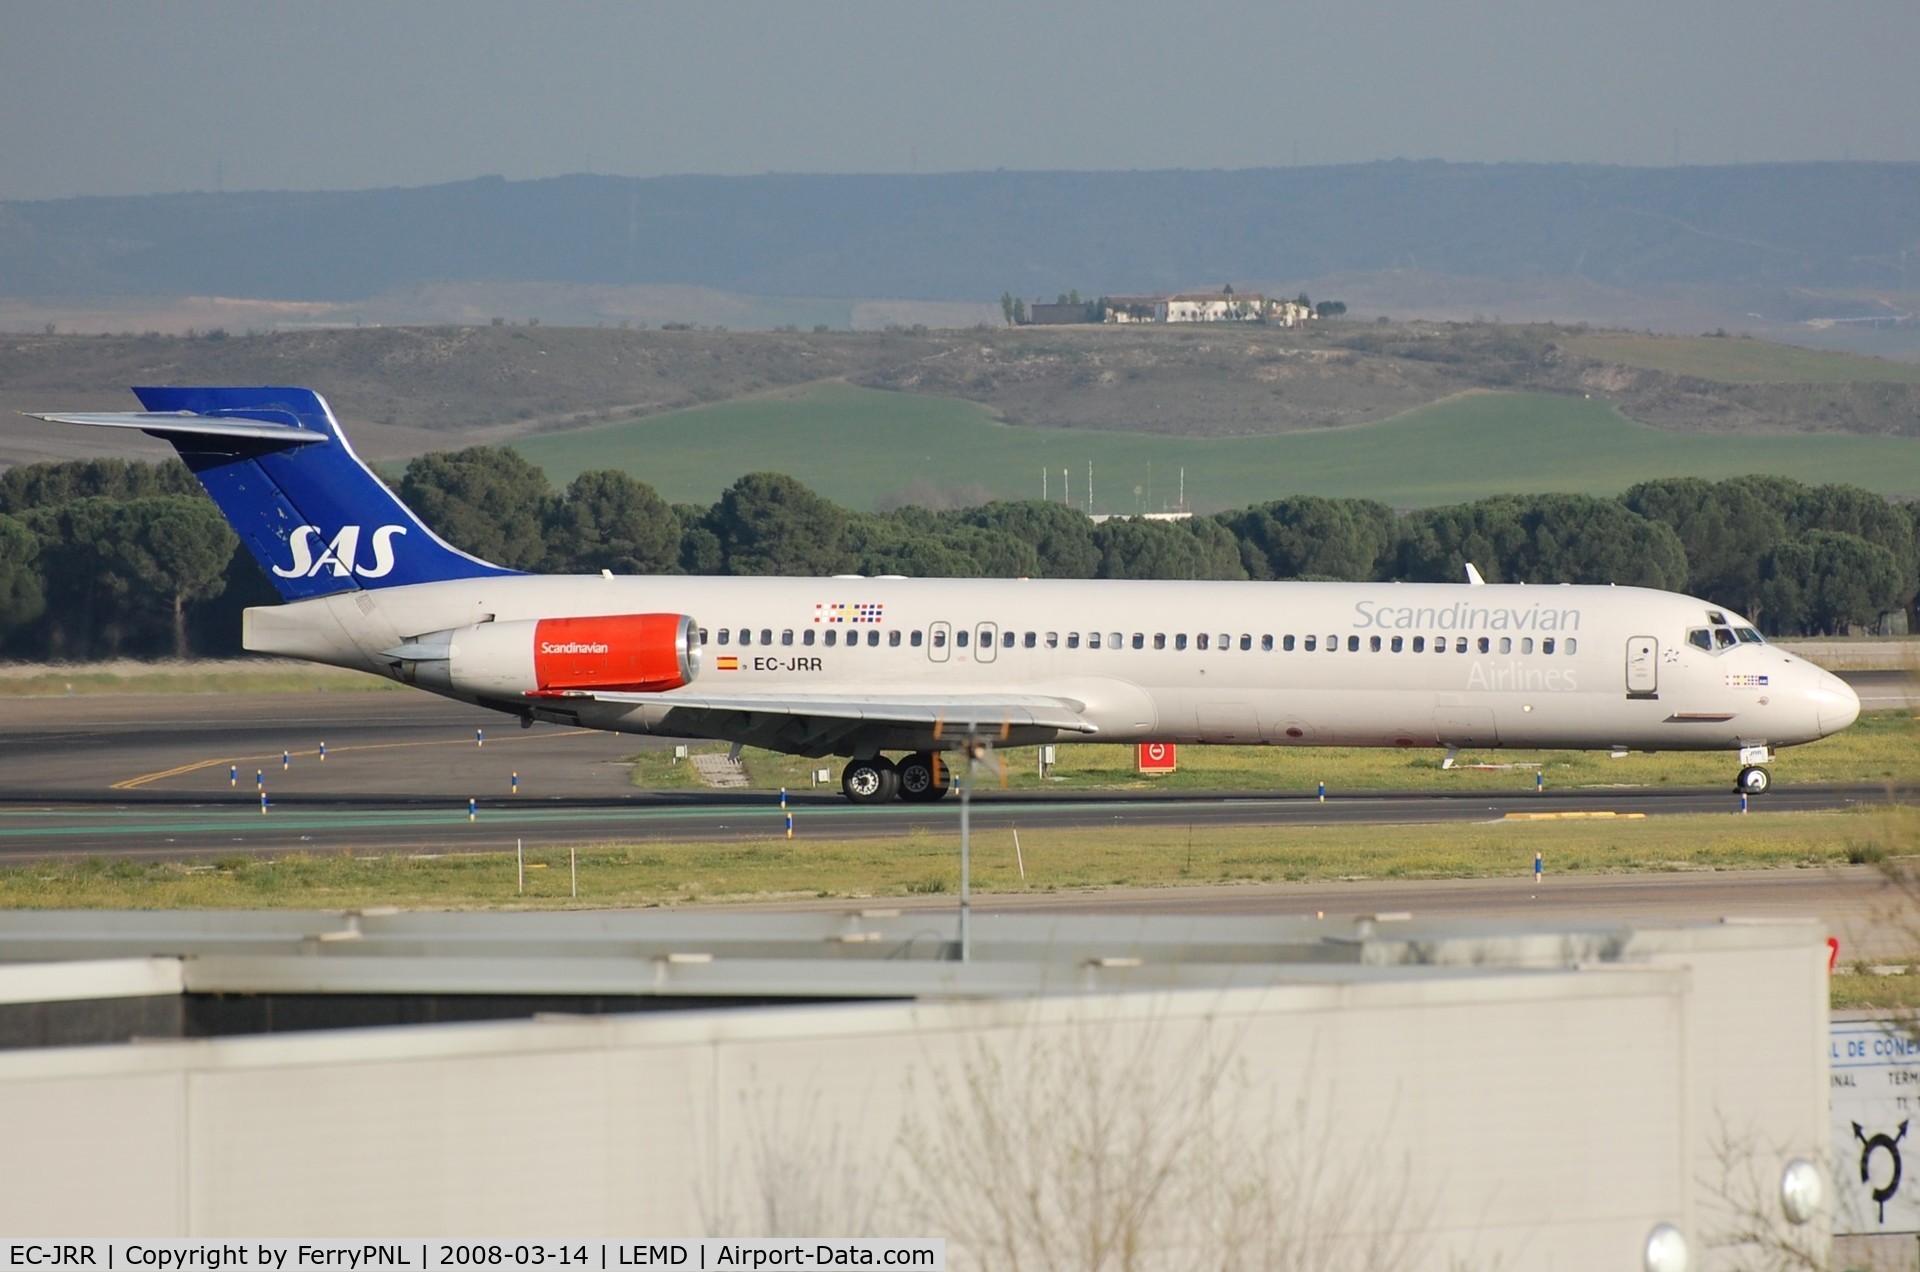 EC-JRR, 1991 McDonnell Douglas MD-87 (DC-9-87) C/N 49612, Spanair MD87 in SAS livery. Frame stored in KIGM since 2010.